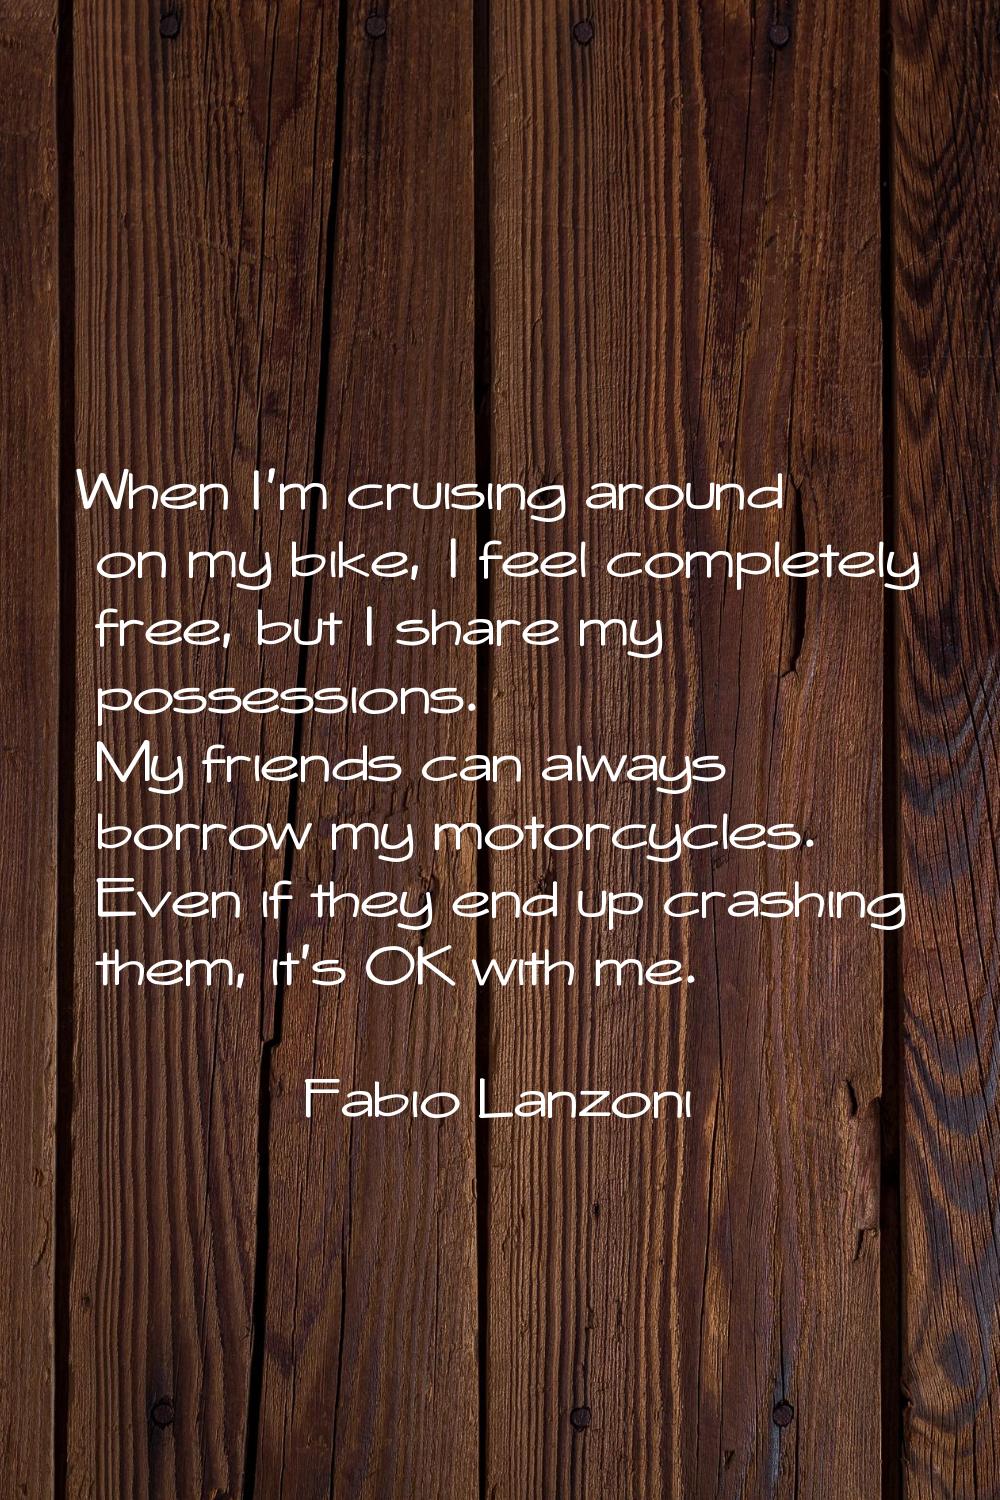 When I'm cruising around on my bike, I feel completely free, but I share my possessions. My friends